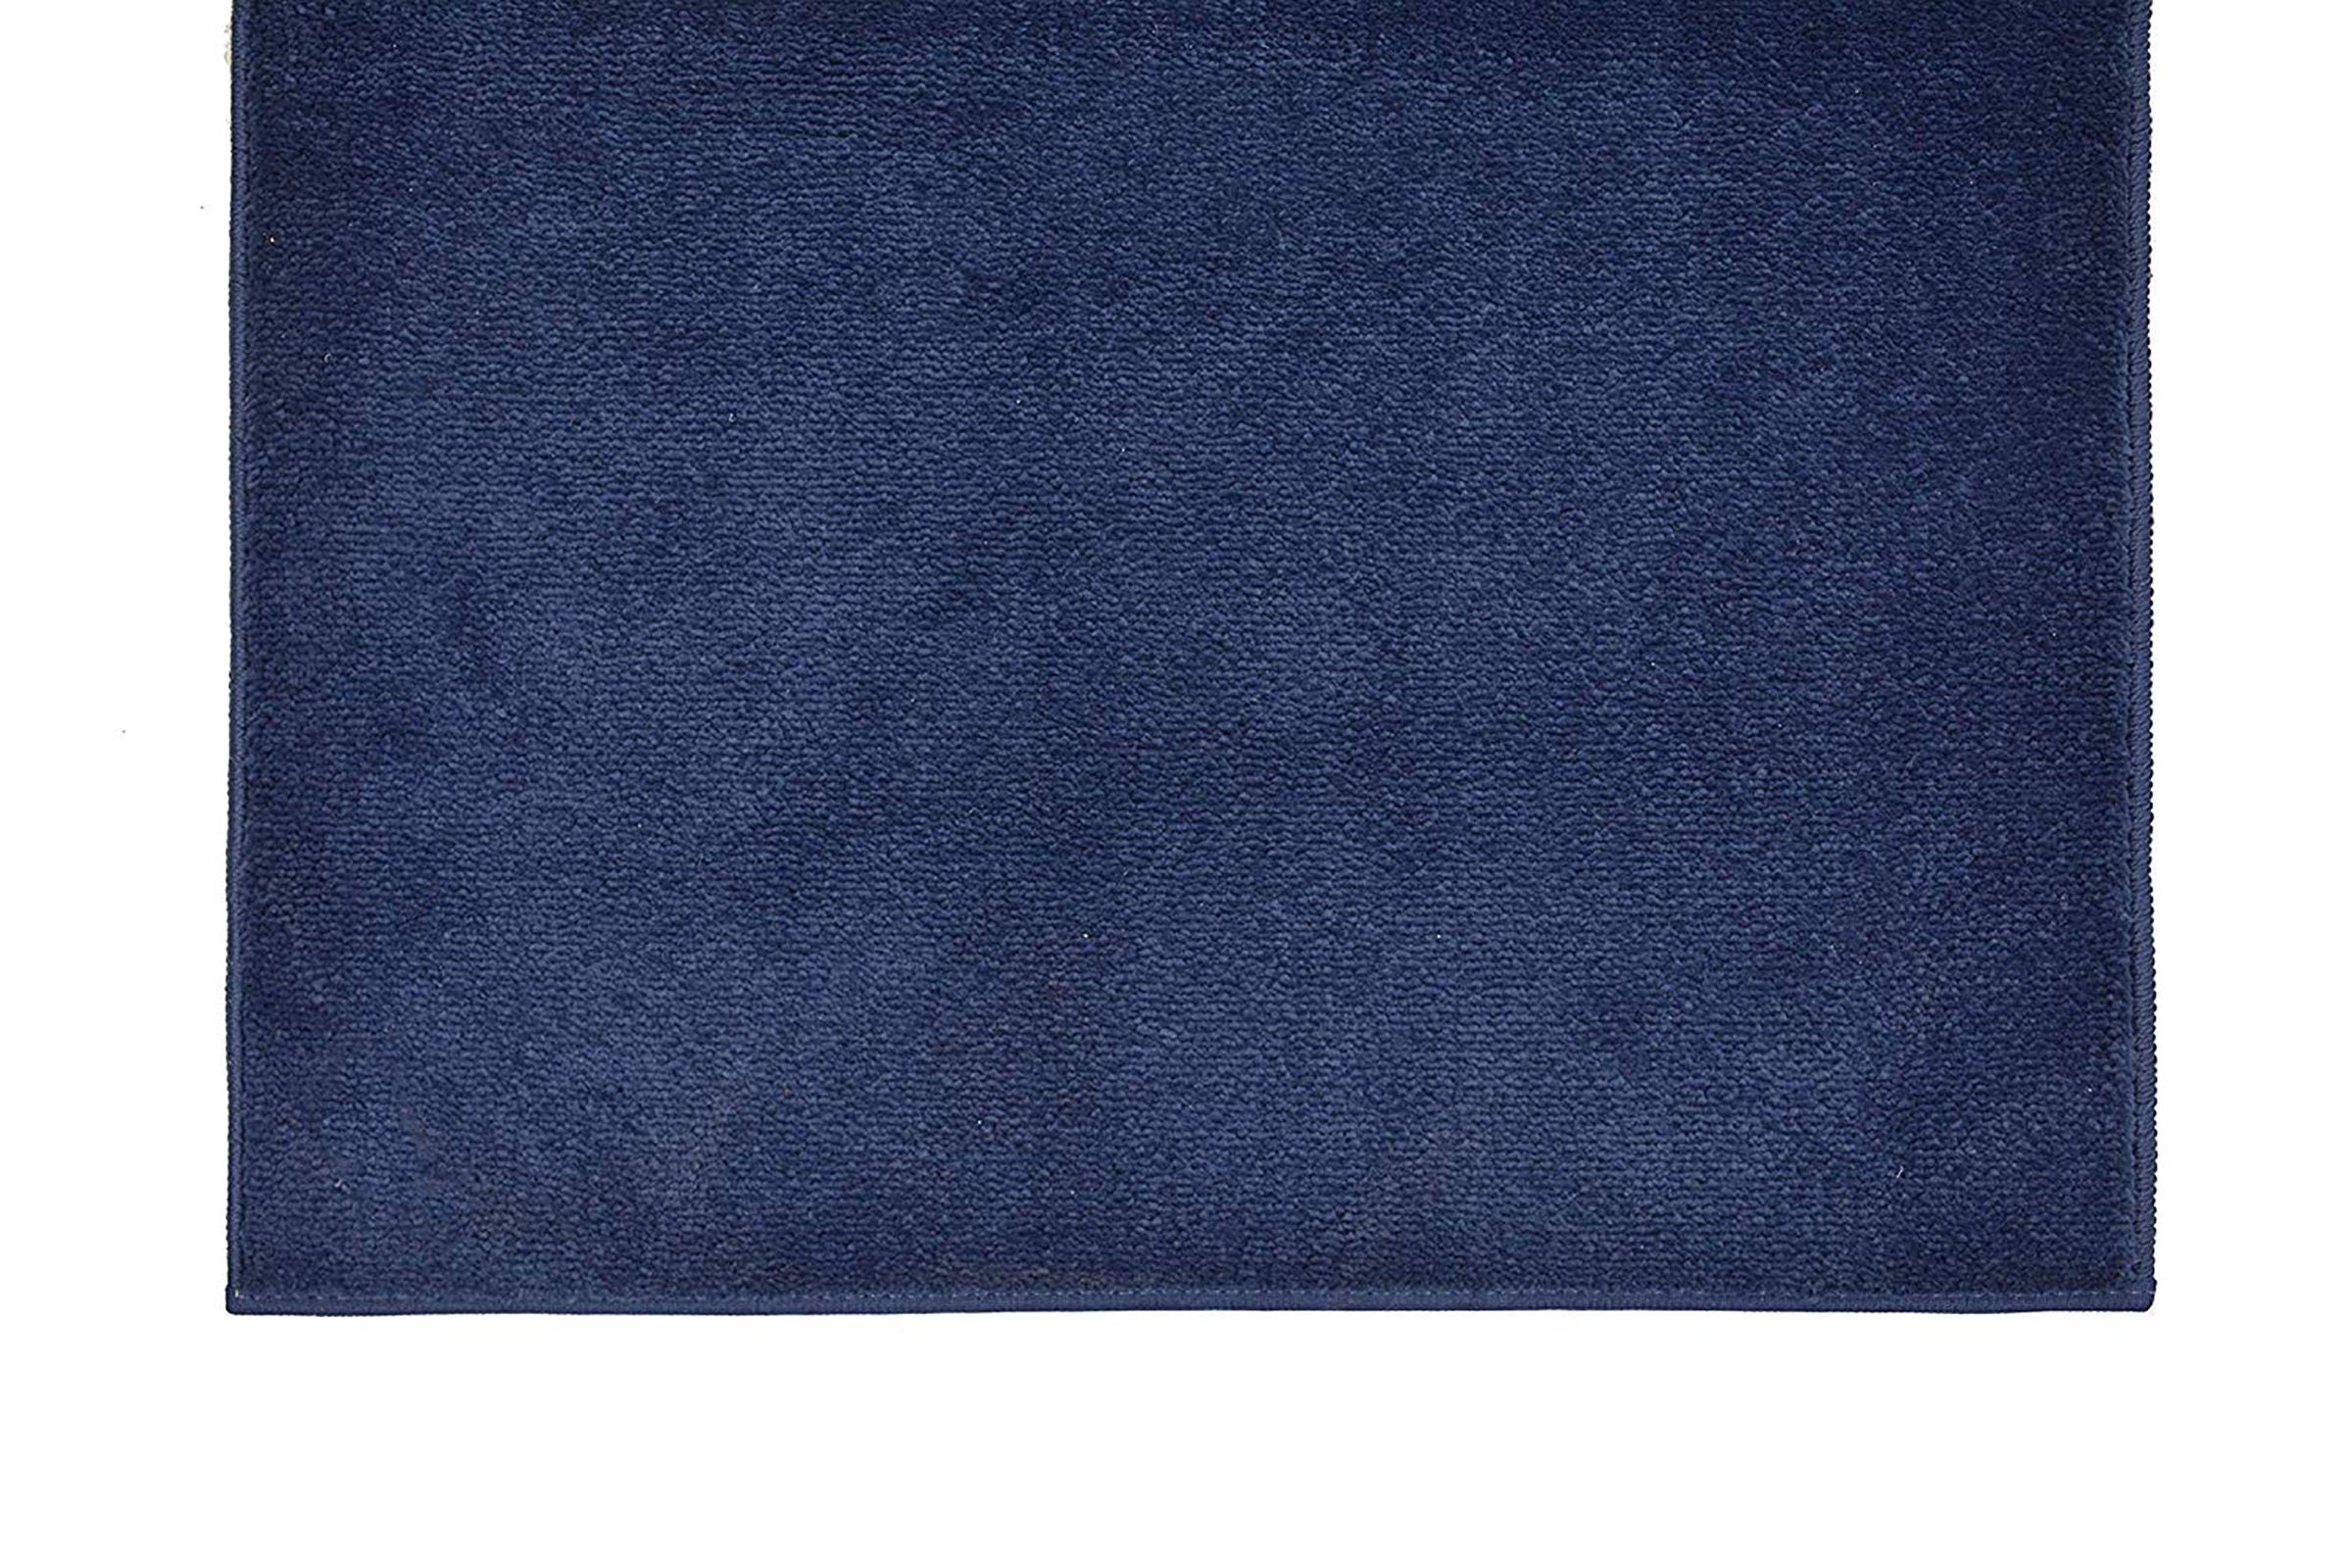 Machine Washable Custom Size Runner Rug Solid Navy Blue Color Skid Resistant Rug Runner Customize Up to 50 Feet and 36 Inch Width Runner Rug-8